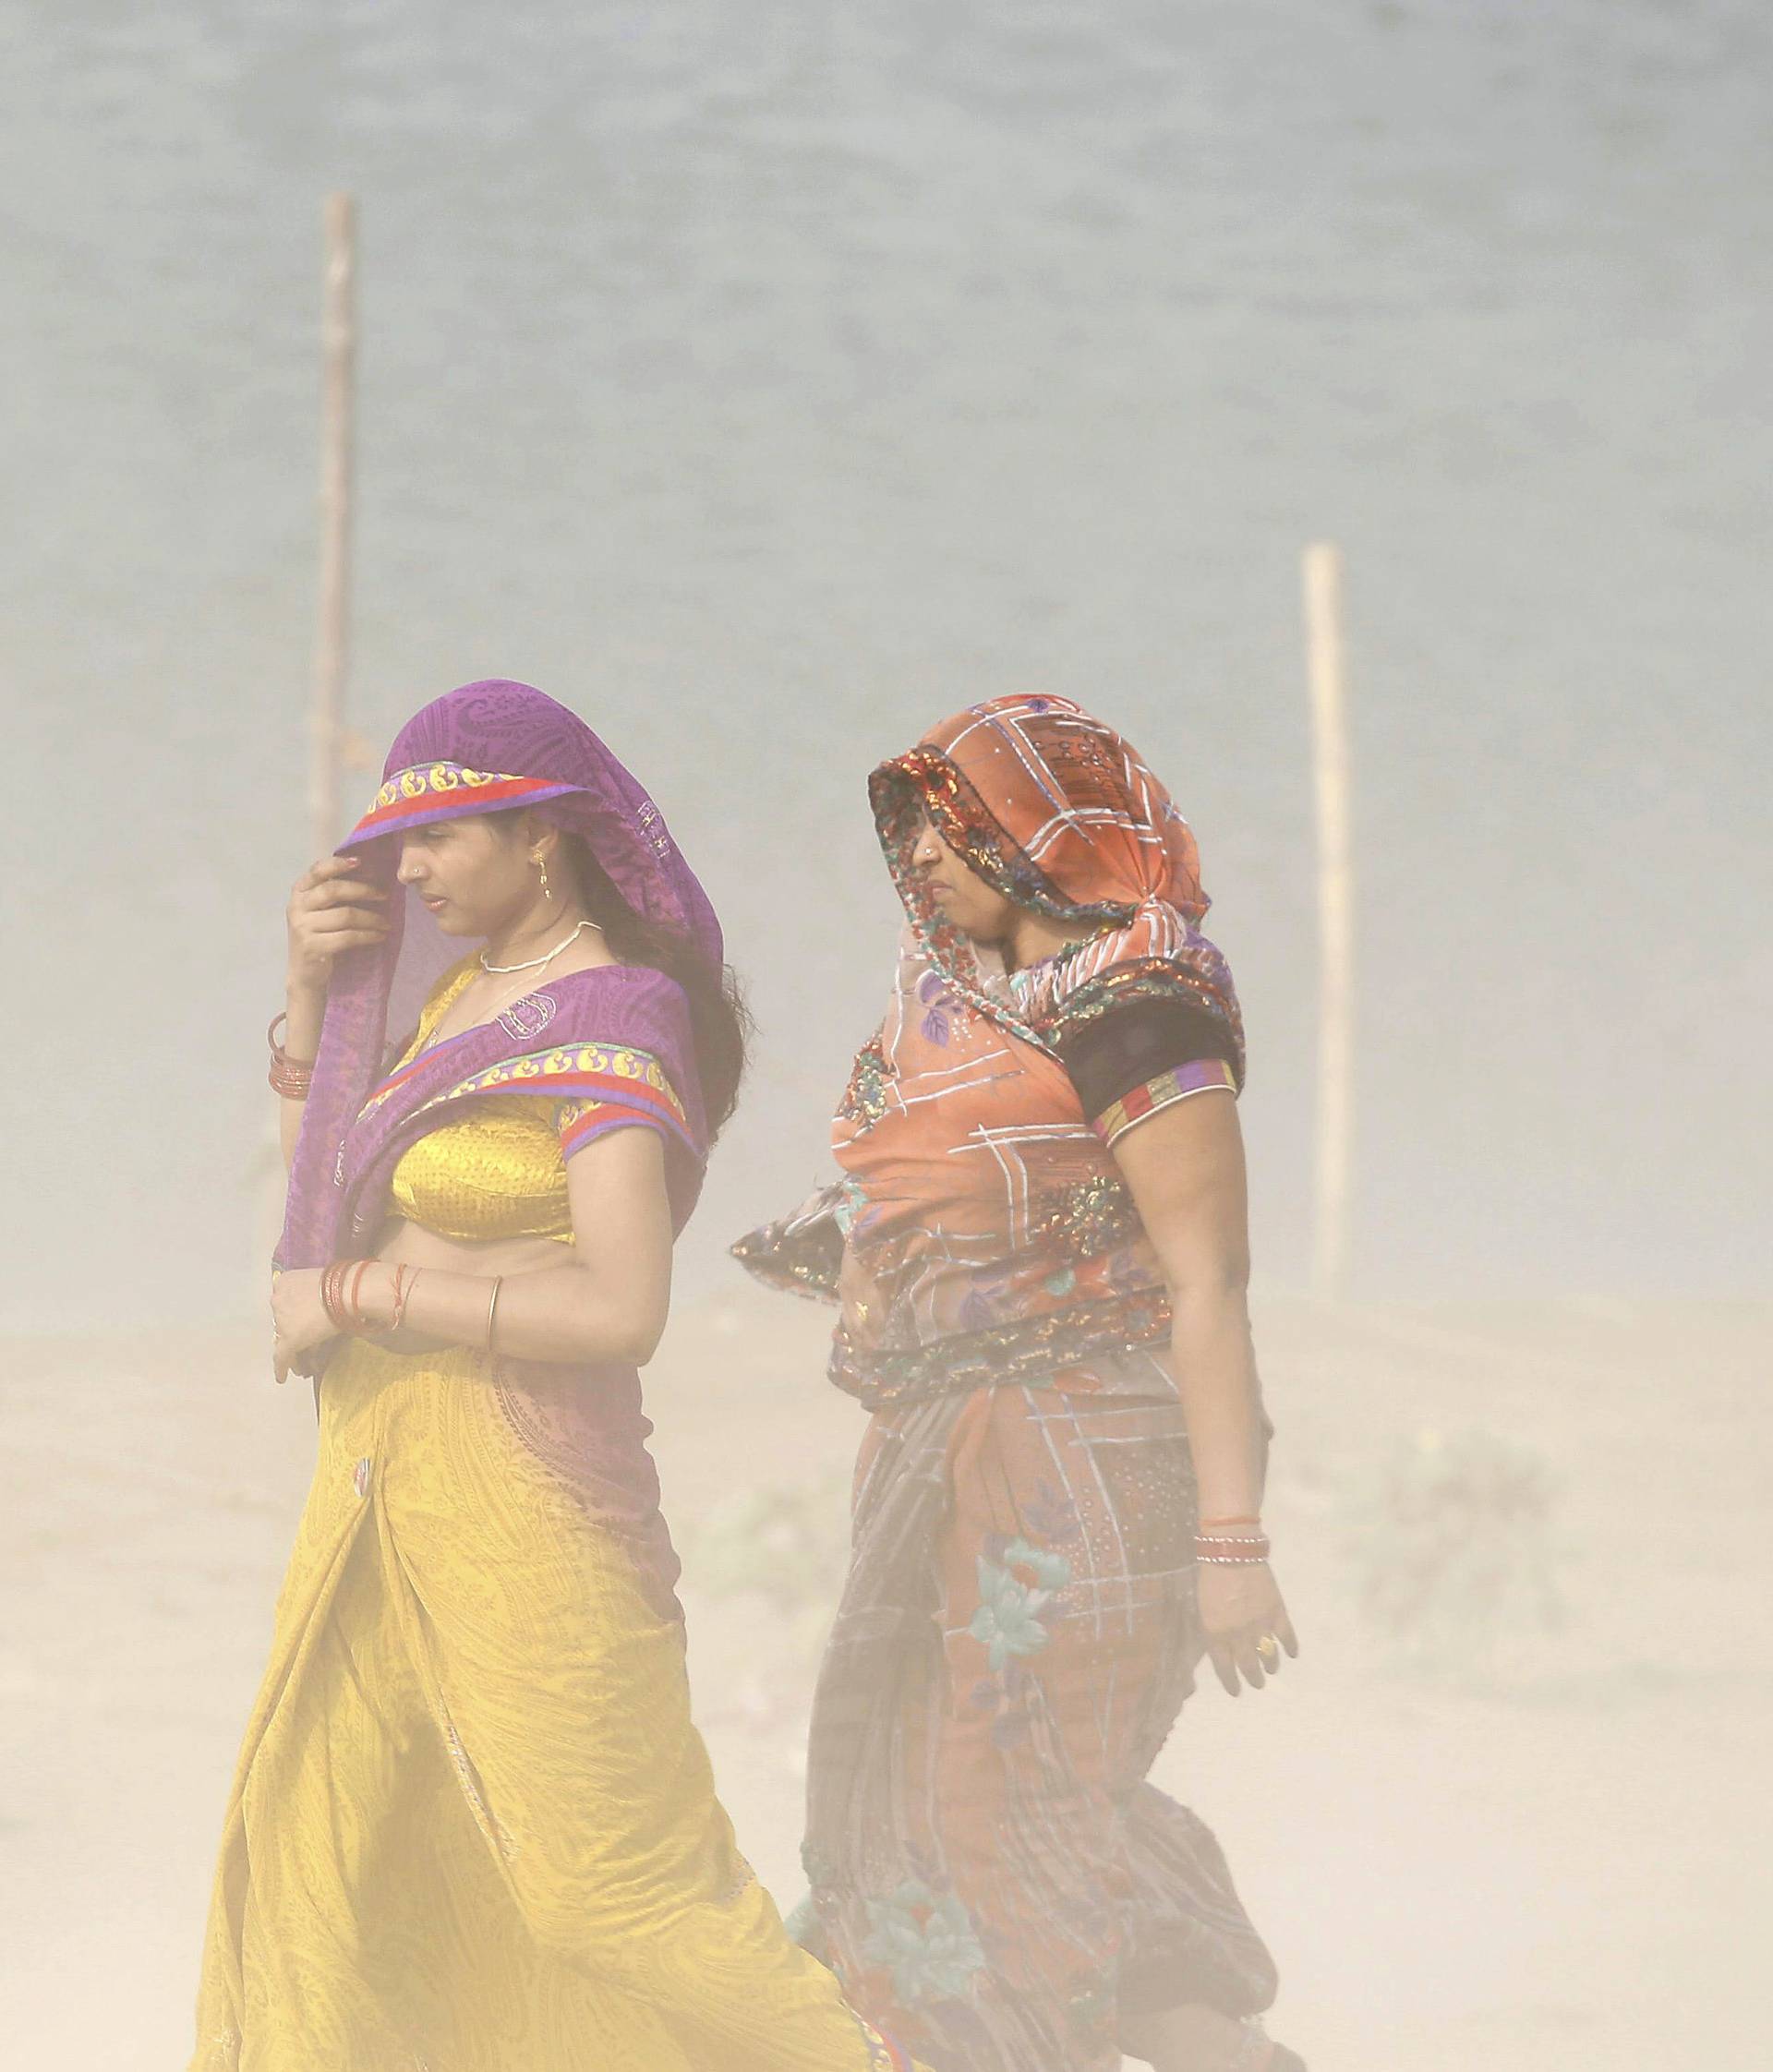 Women cover themselves as they walk on the banks of the river Ganges during a dust storm in Allahabad